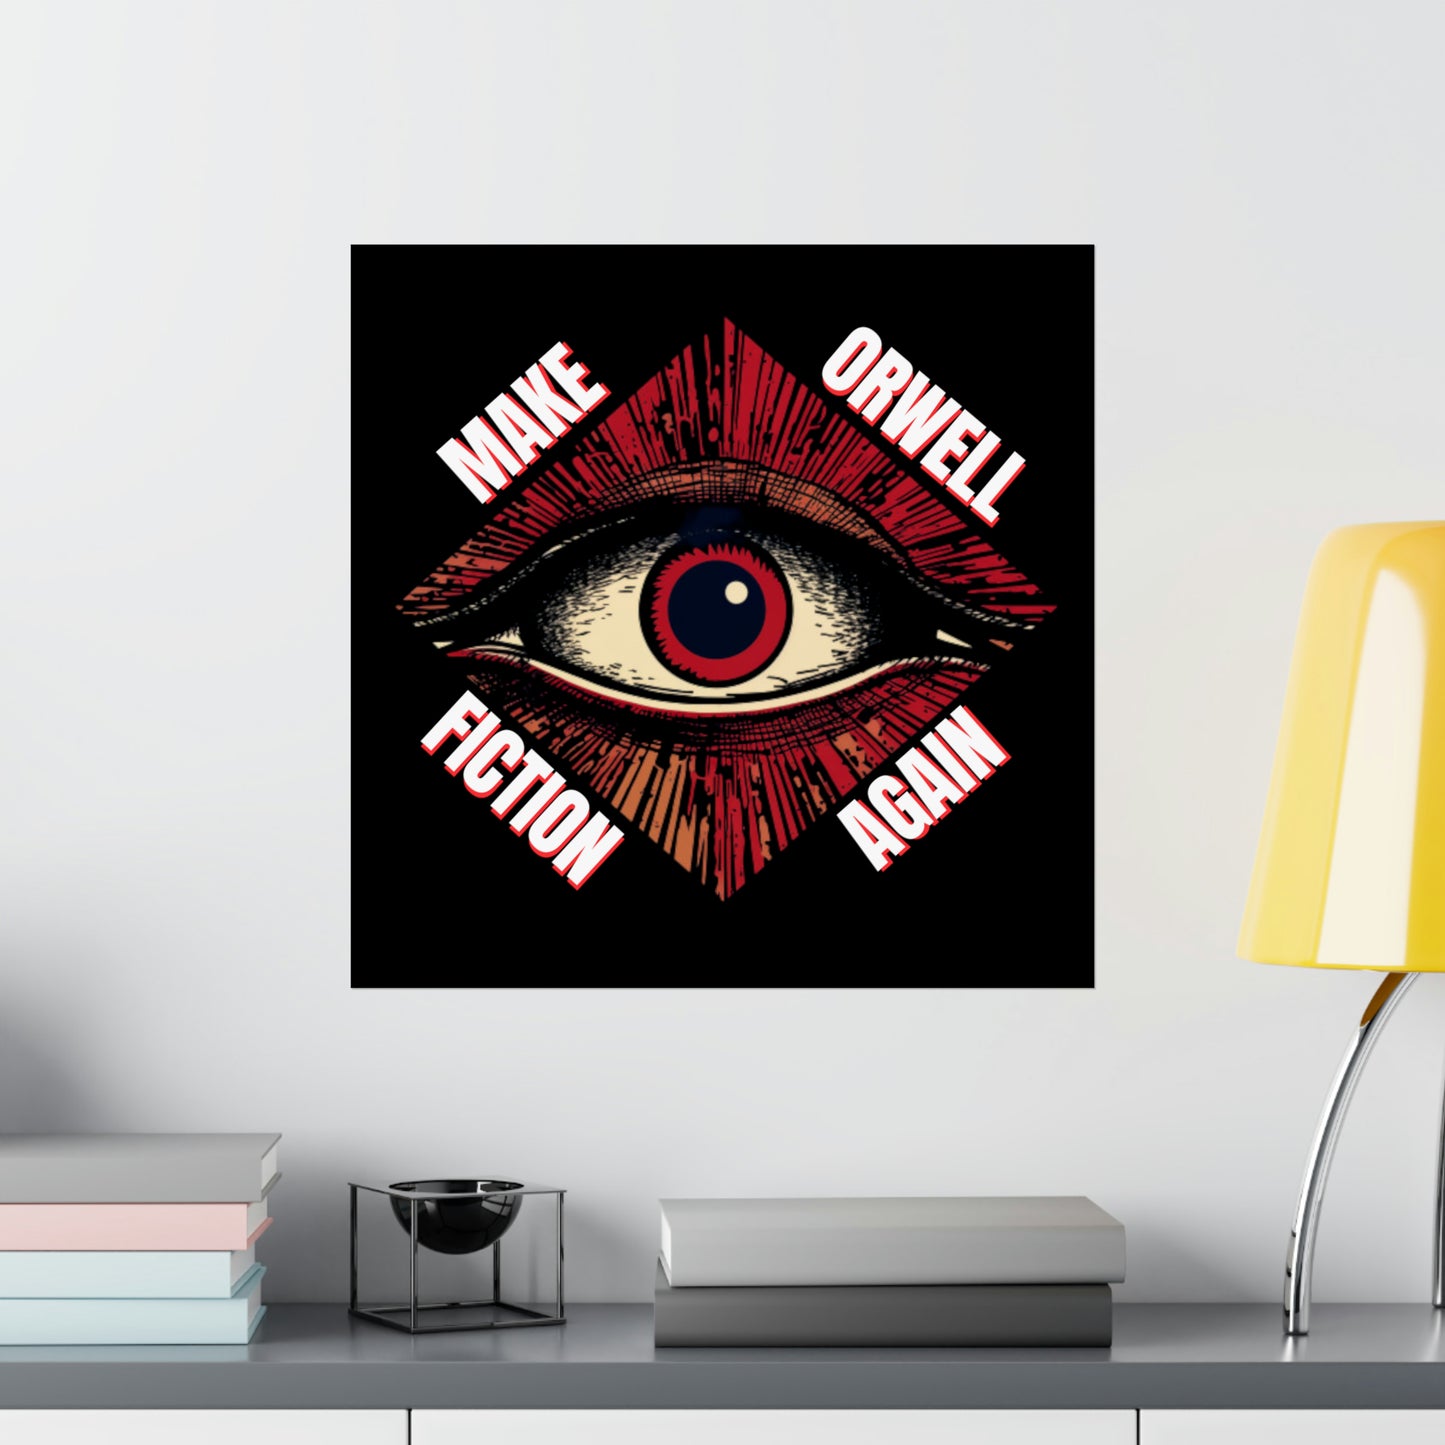 Make Orwell Fiction Again Matte Vertical Posters